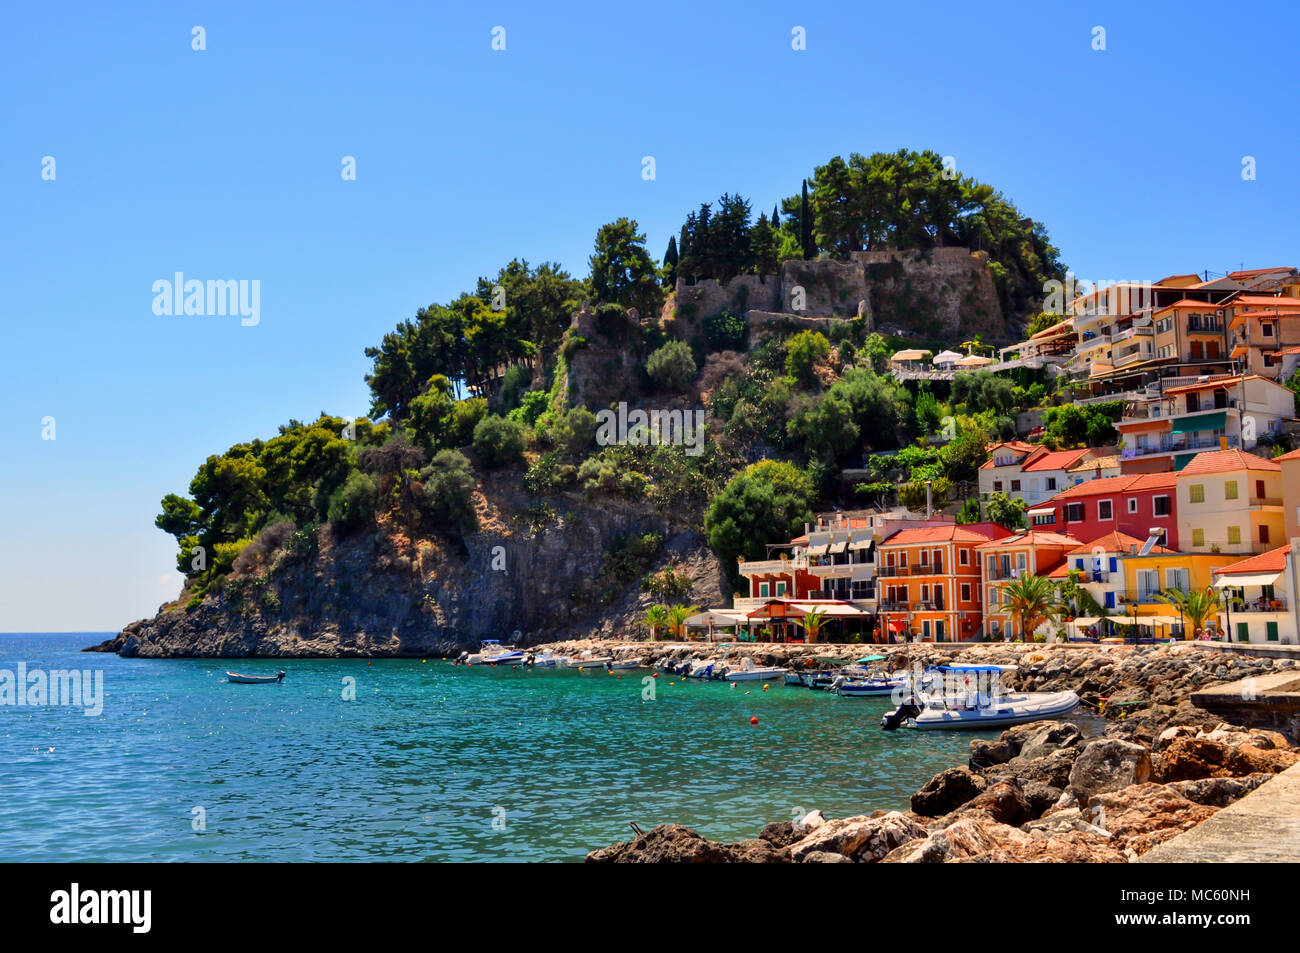 Parga, Epirus - Greece. Colorful houses amphitheatrically built next to the castle of Parga. Sunny day with clear blue sky Stock Photo